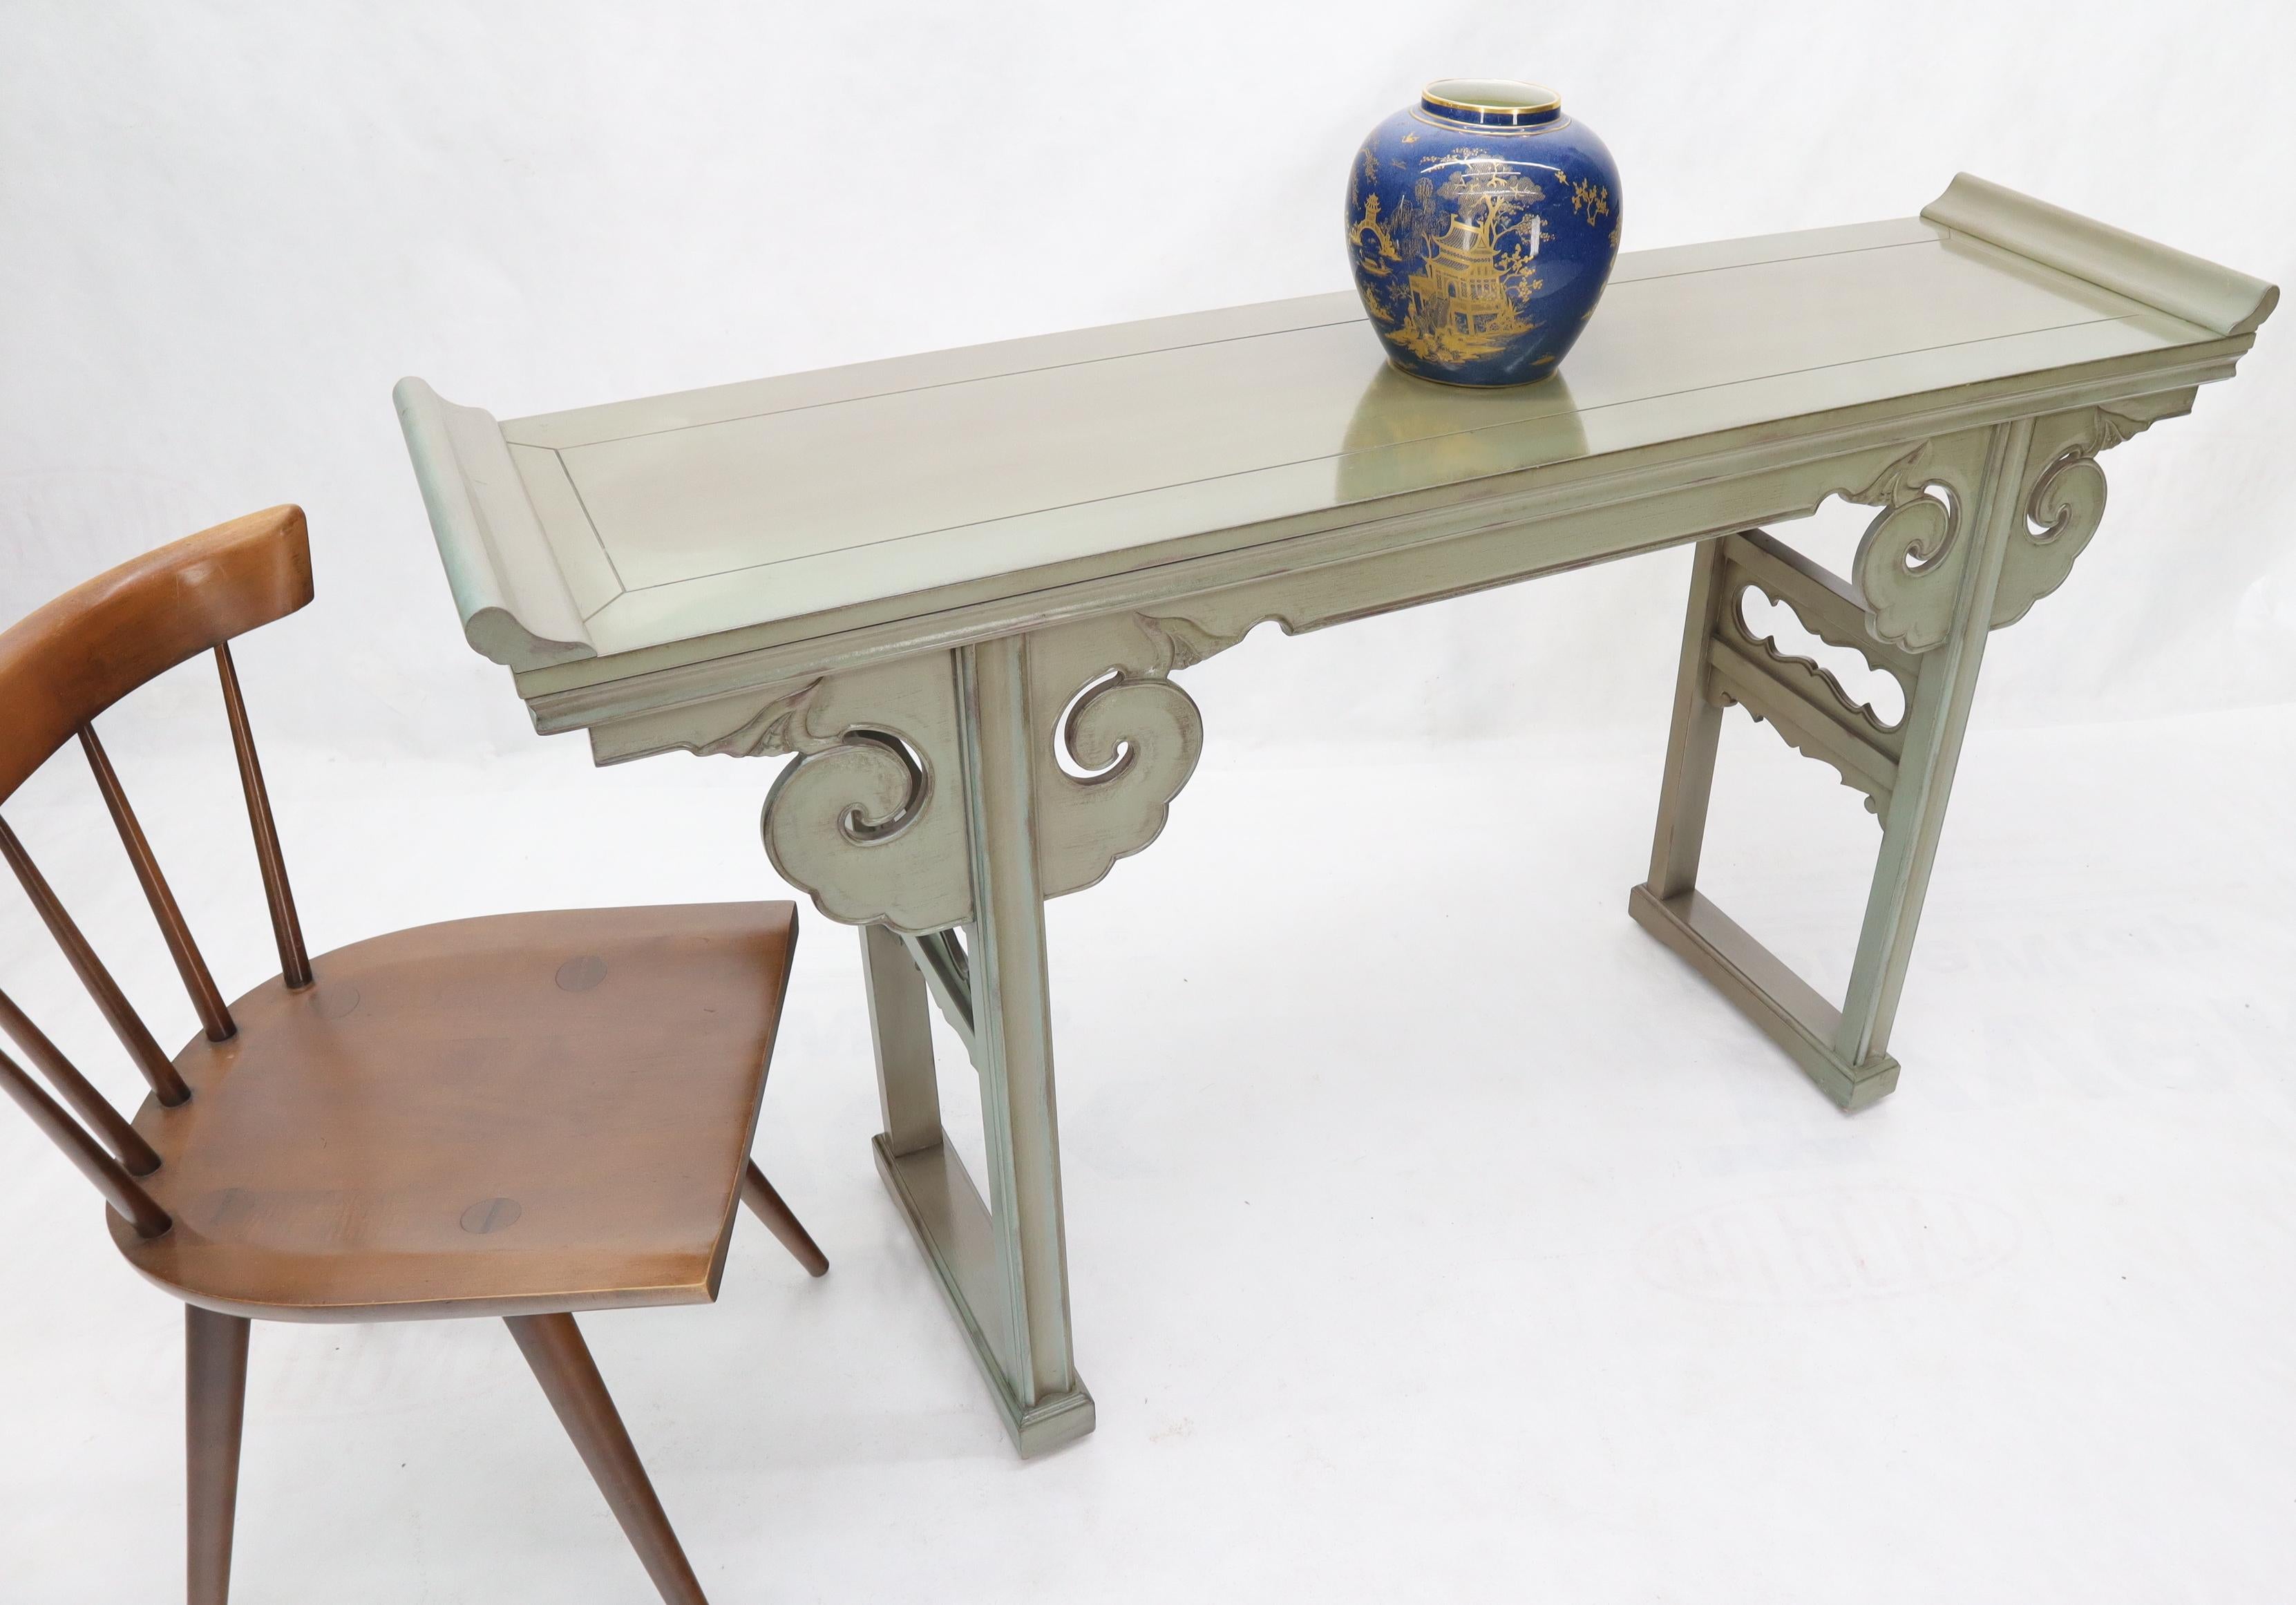 Decorative neutral olive tone finish Asian style painted console table.